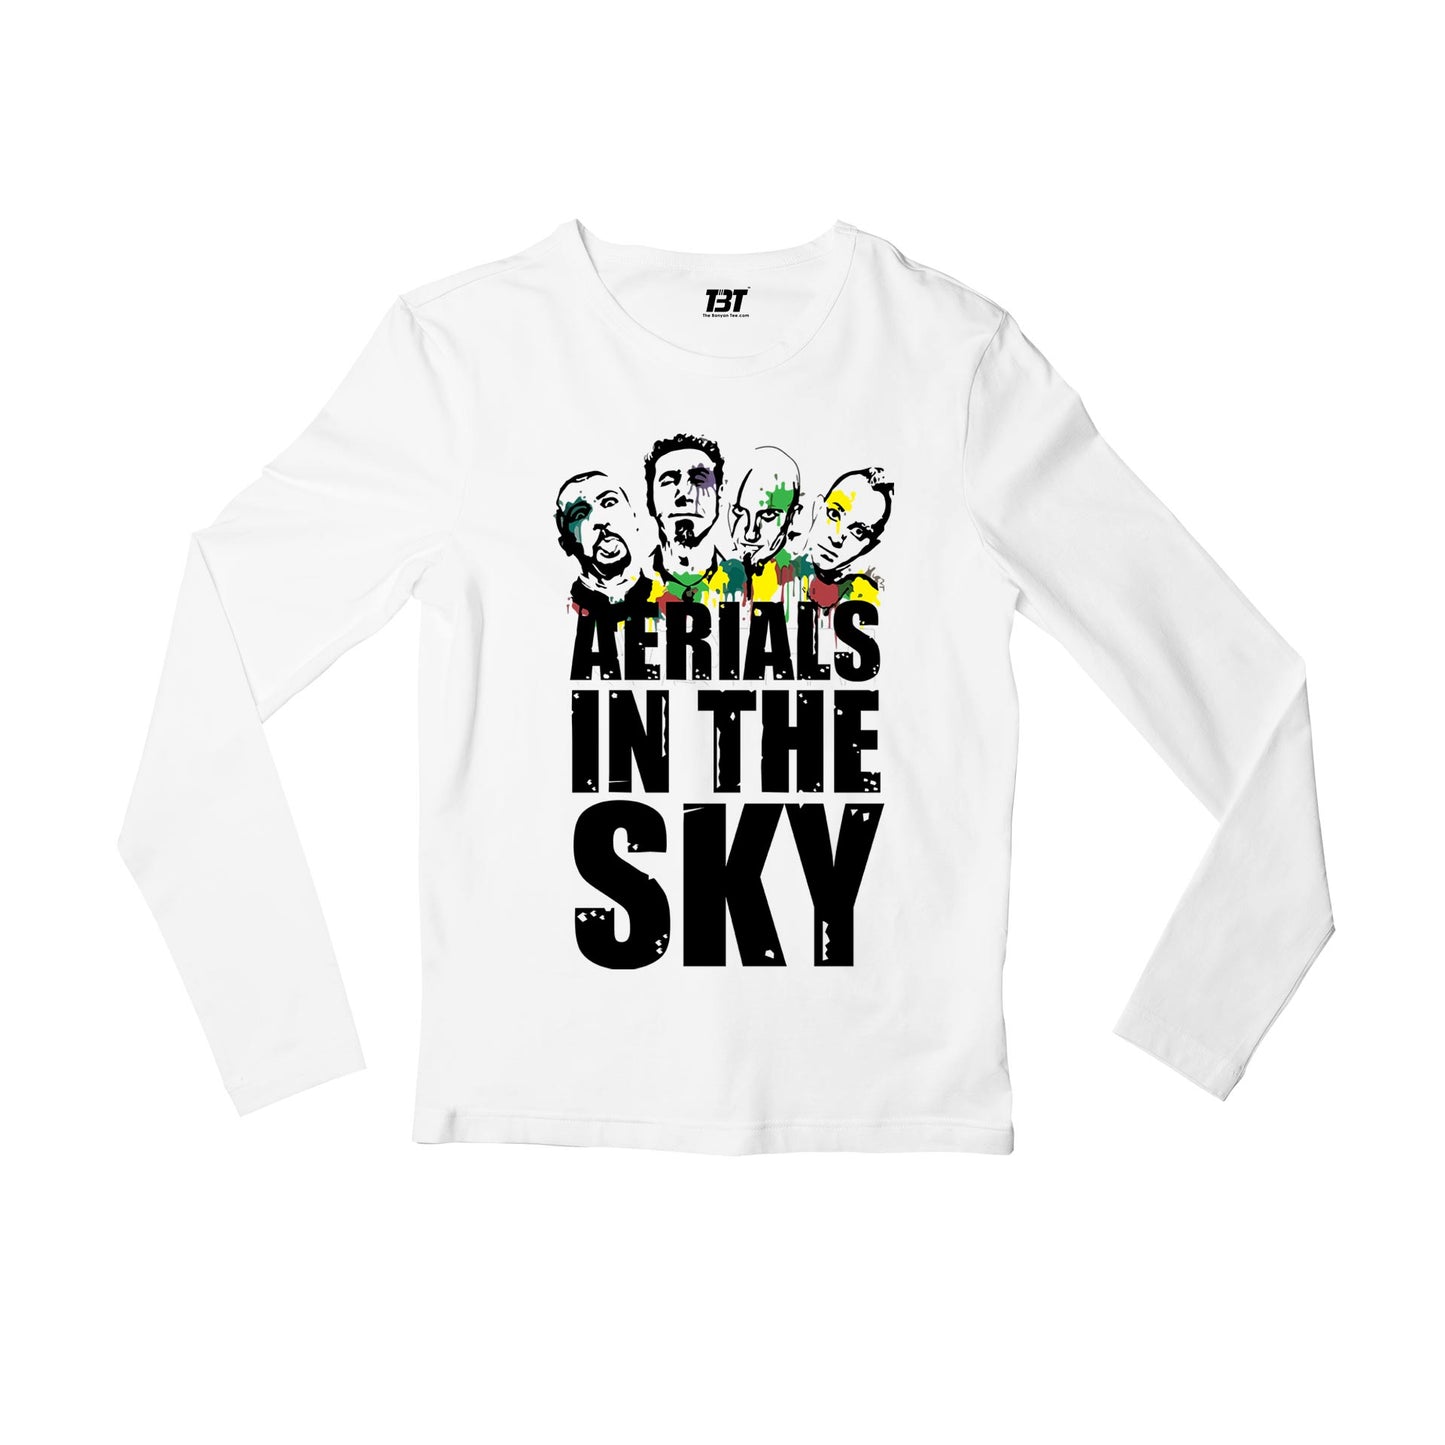 system of a down aerials in the sky full sleeves long sleeves music band buy online india the banyan tee tbt men women girls boys unisex white